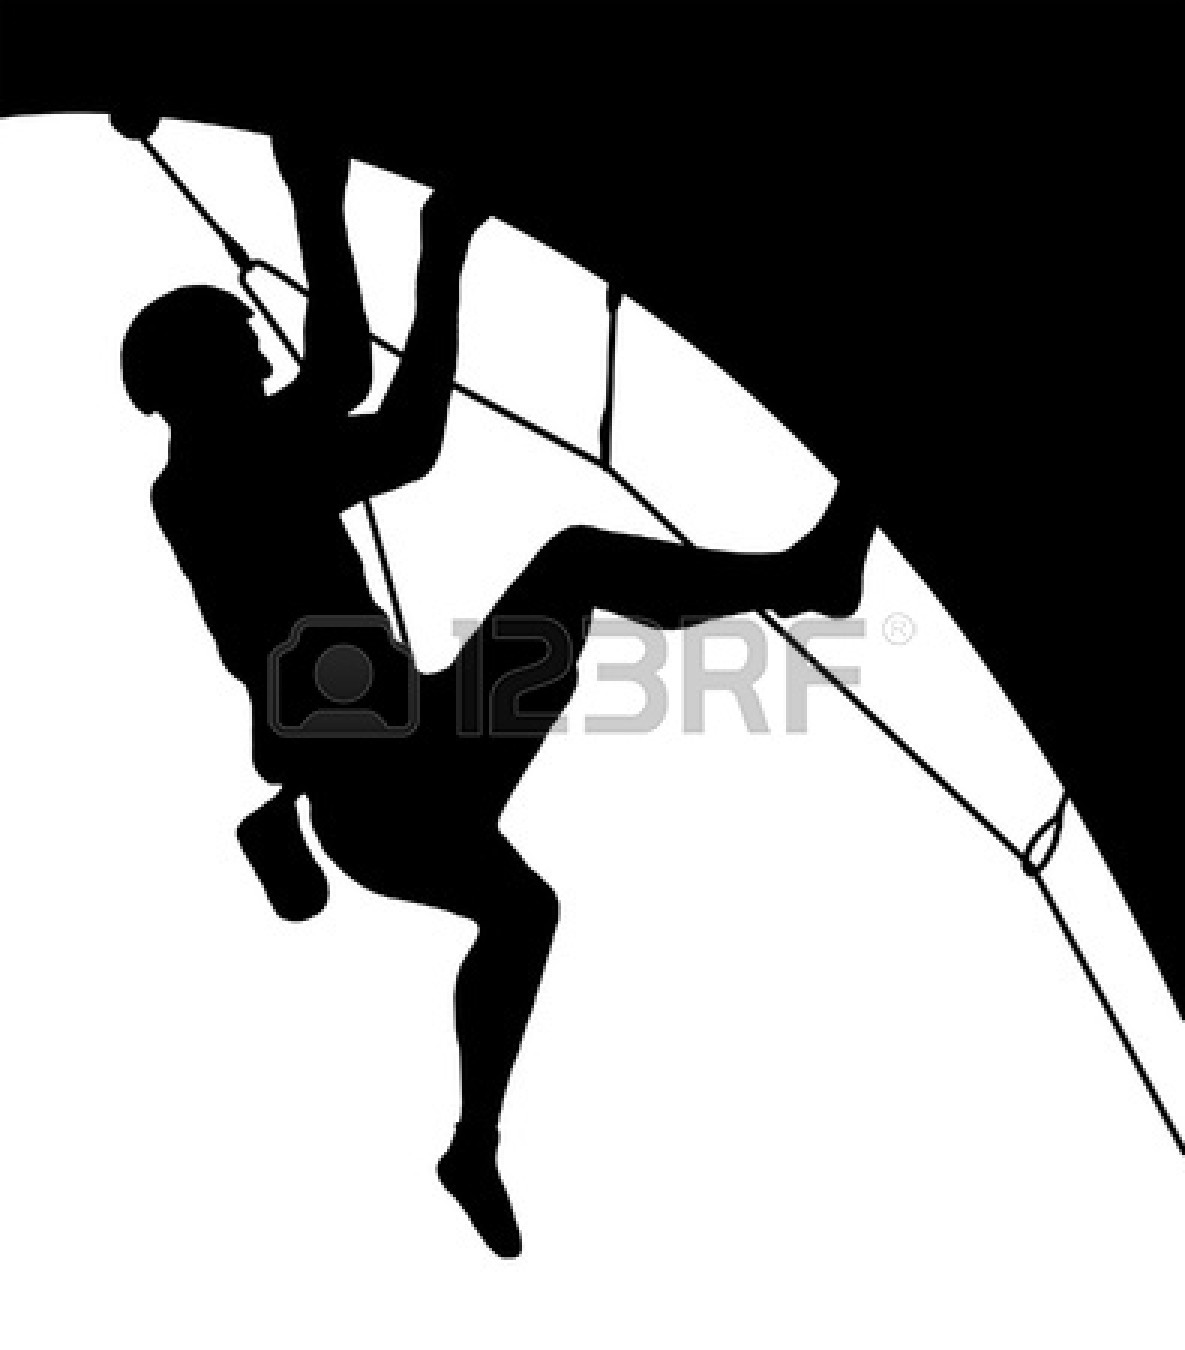 Mountain Climbing Silhouette   Clipart Panda   Free Clipart Images